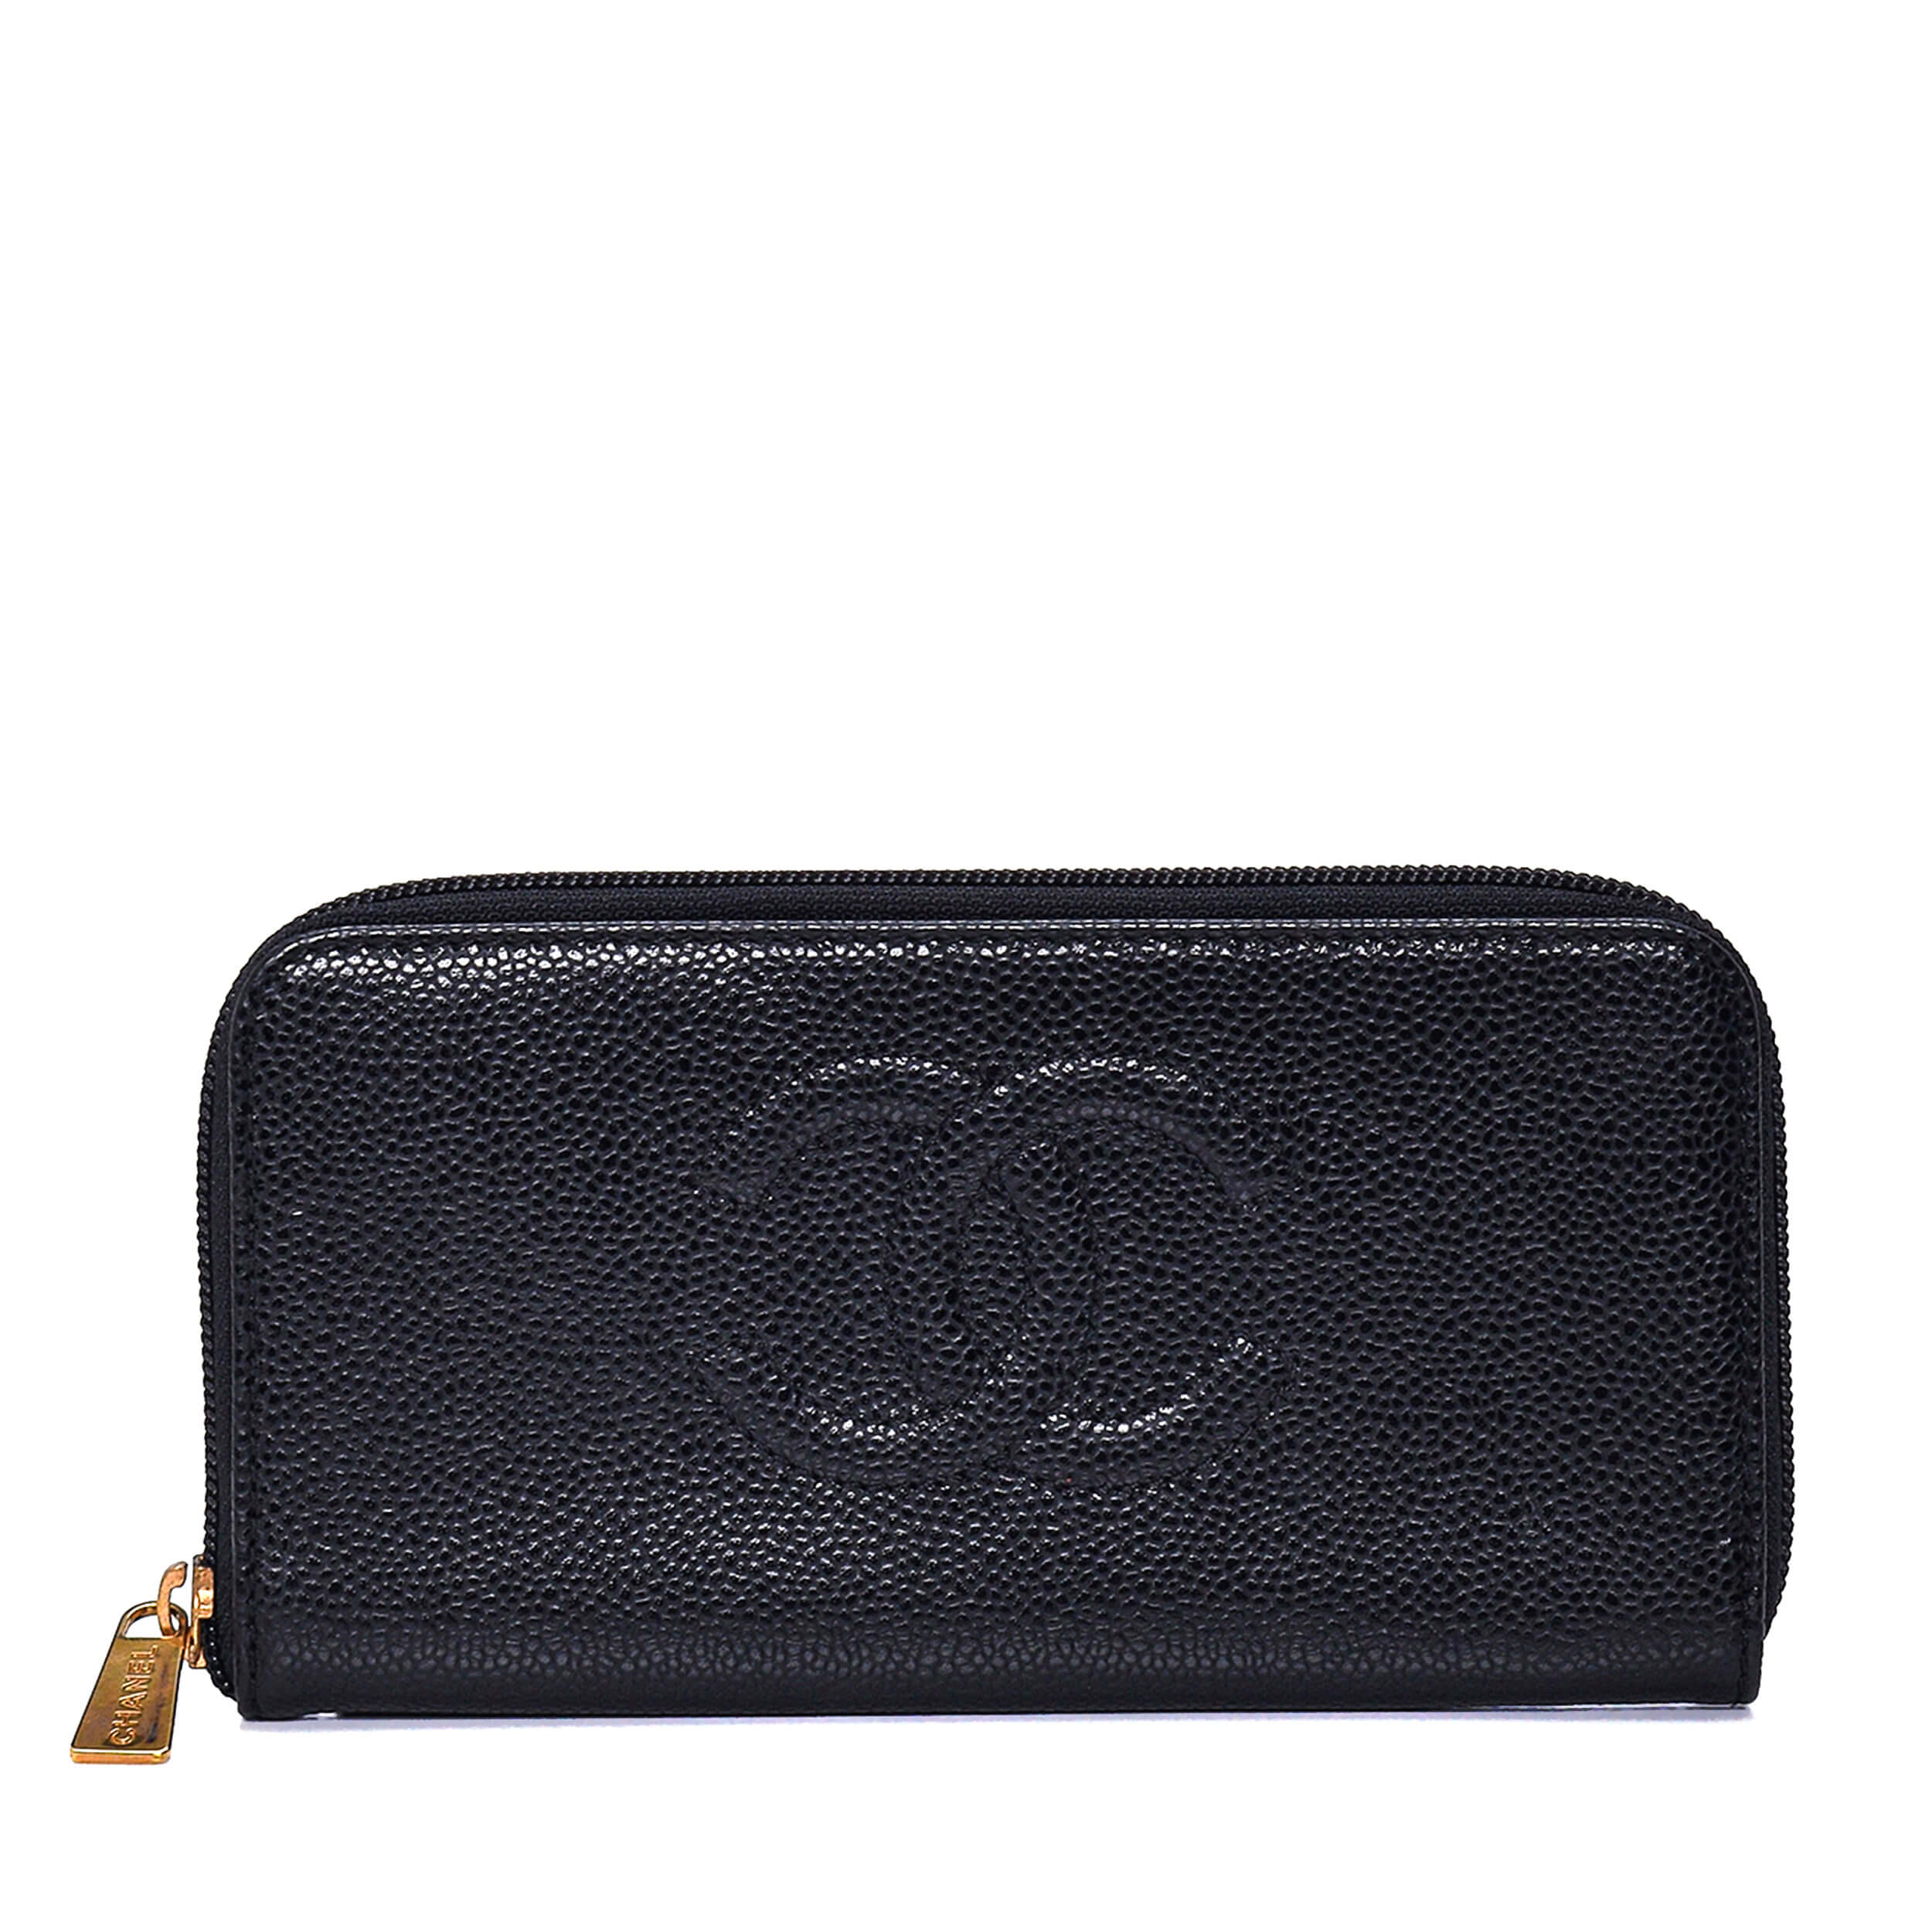 Chanel - Black Caviar Leather CC Timeless Zip Small Wallet